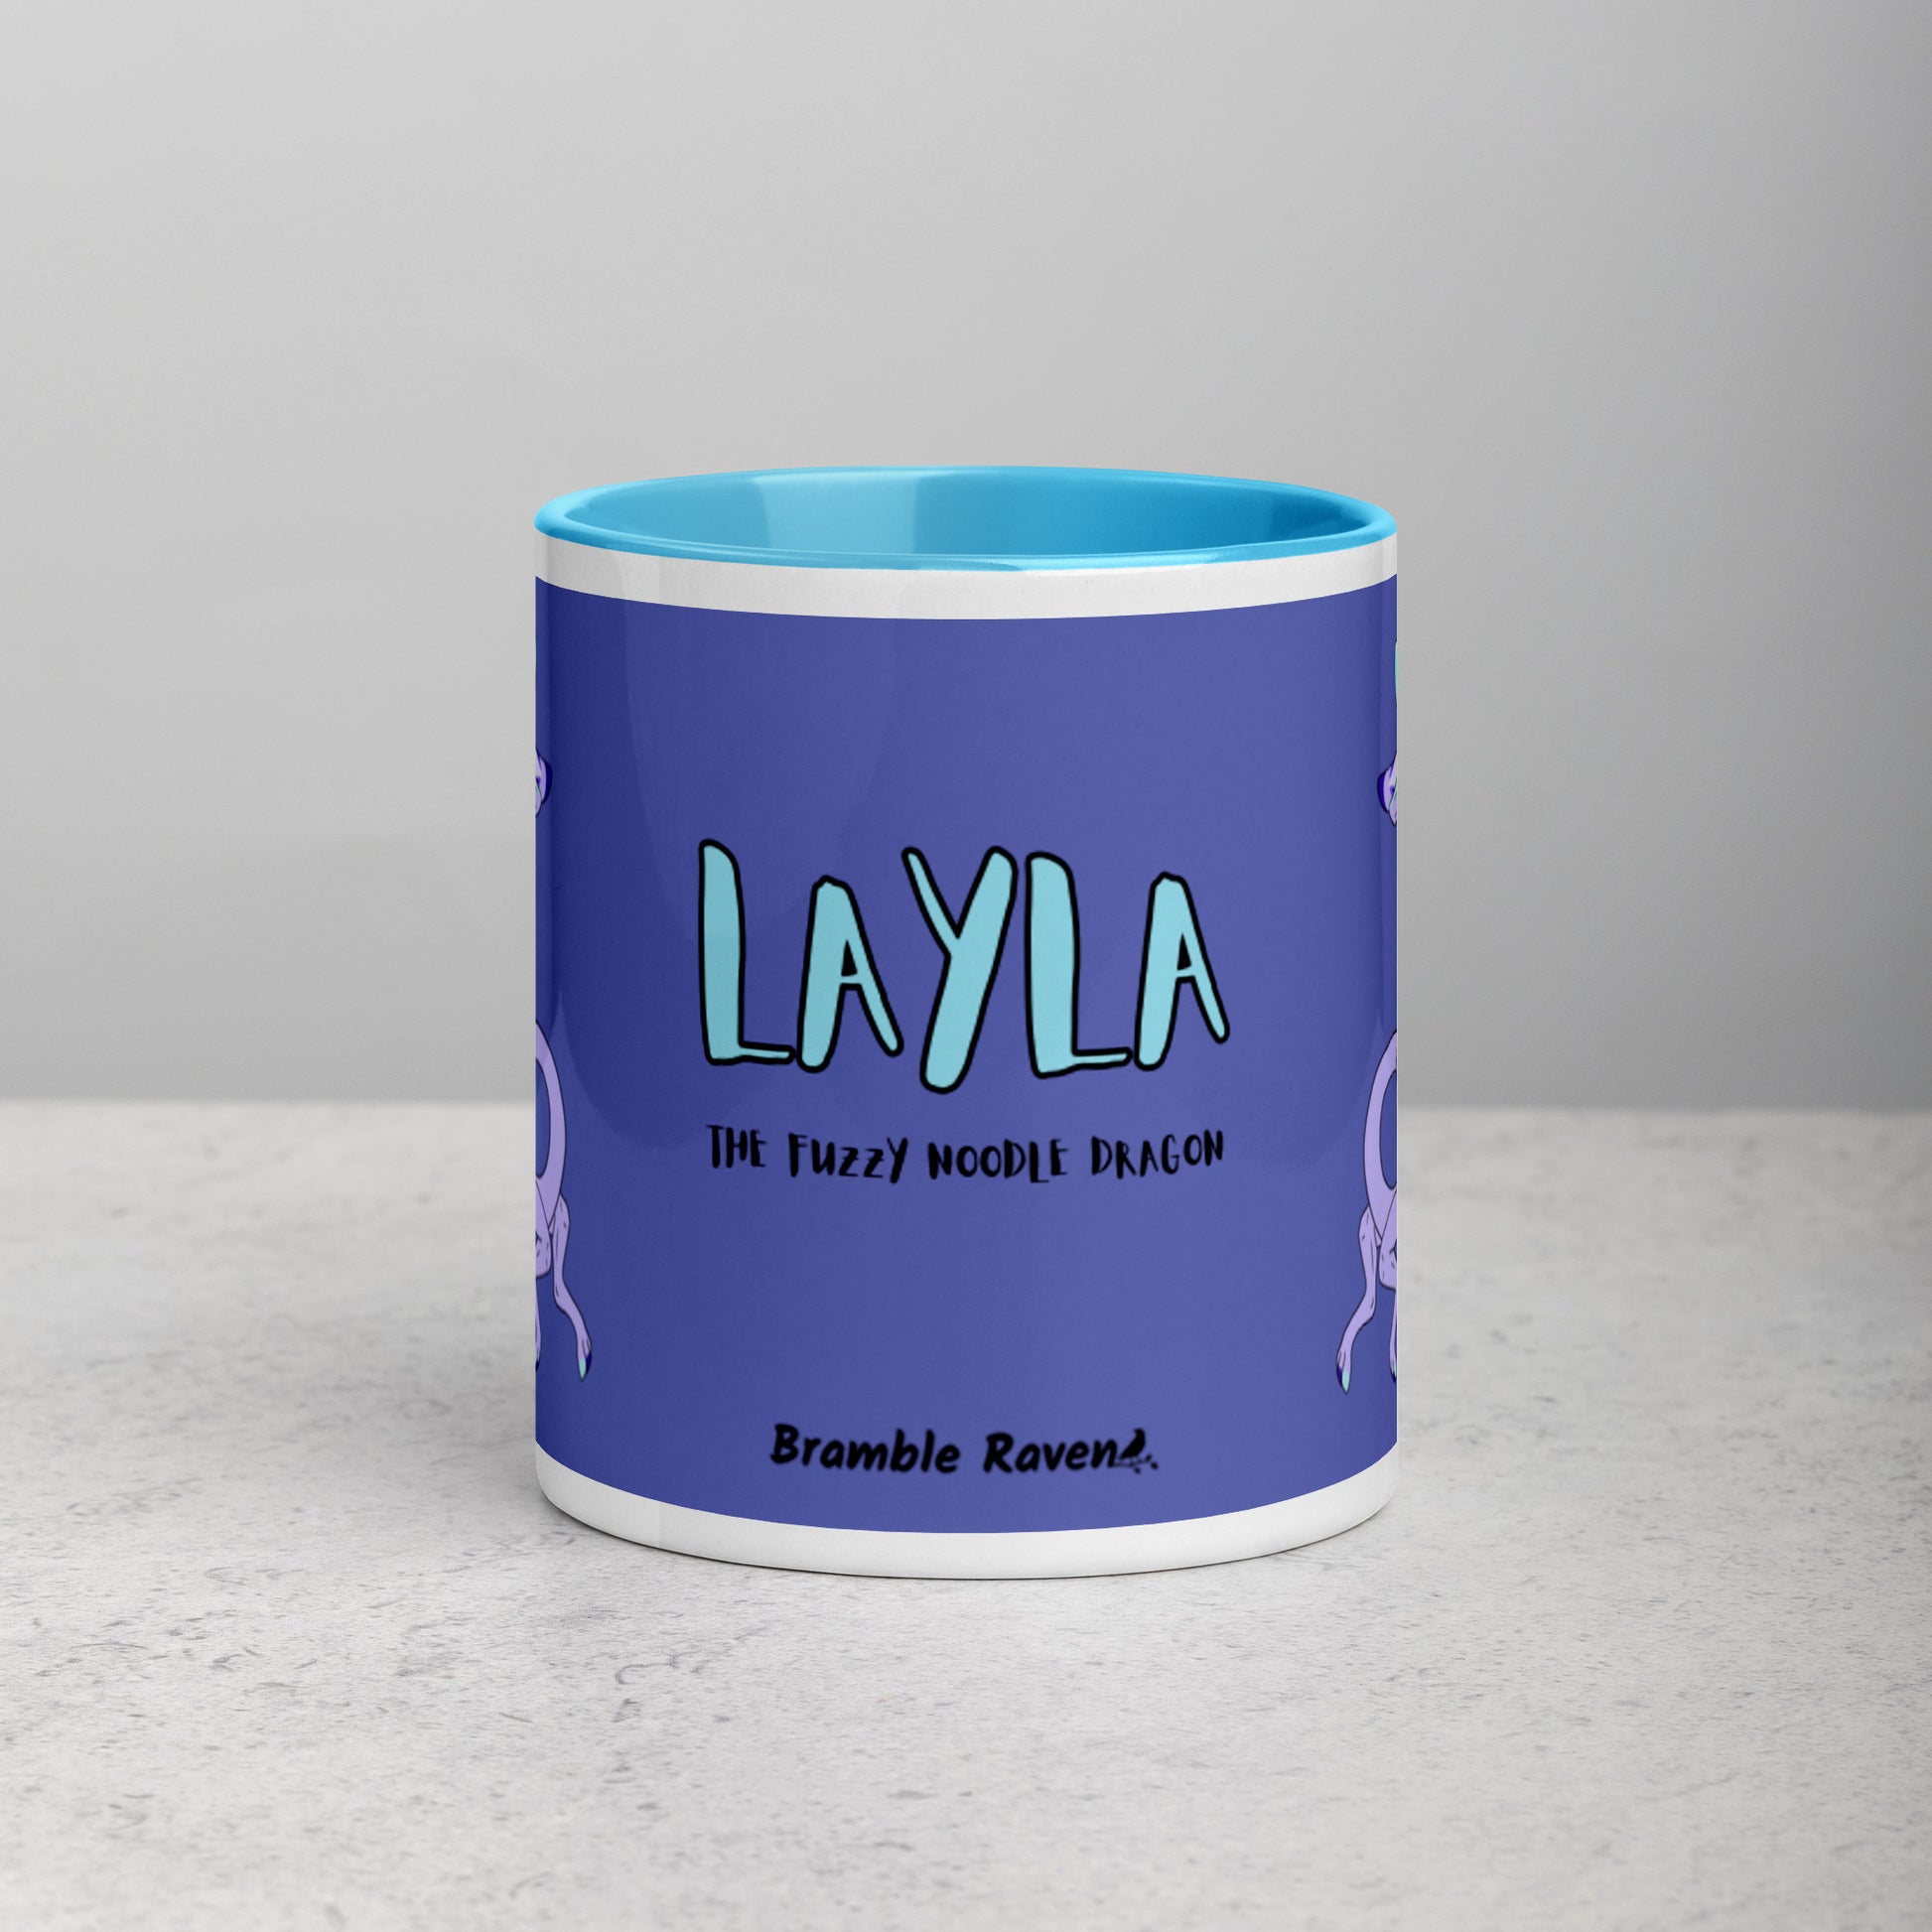 11 ounce white ceramic mug. Blue inside and handle. Features double-sided image of Layla the Lavender Fuzzy Noodle Dragon. Shown on tabletop. Front view shows Layla the Fuzzy Noodle Dragon text and Bramble Raven logo.